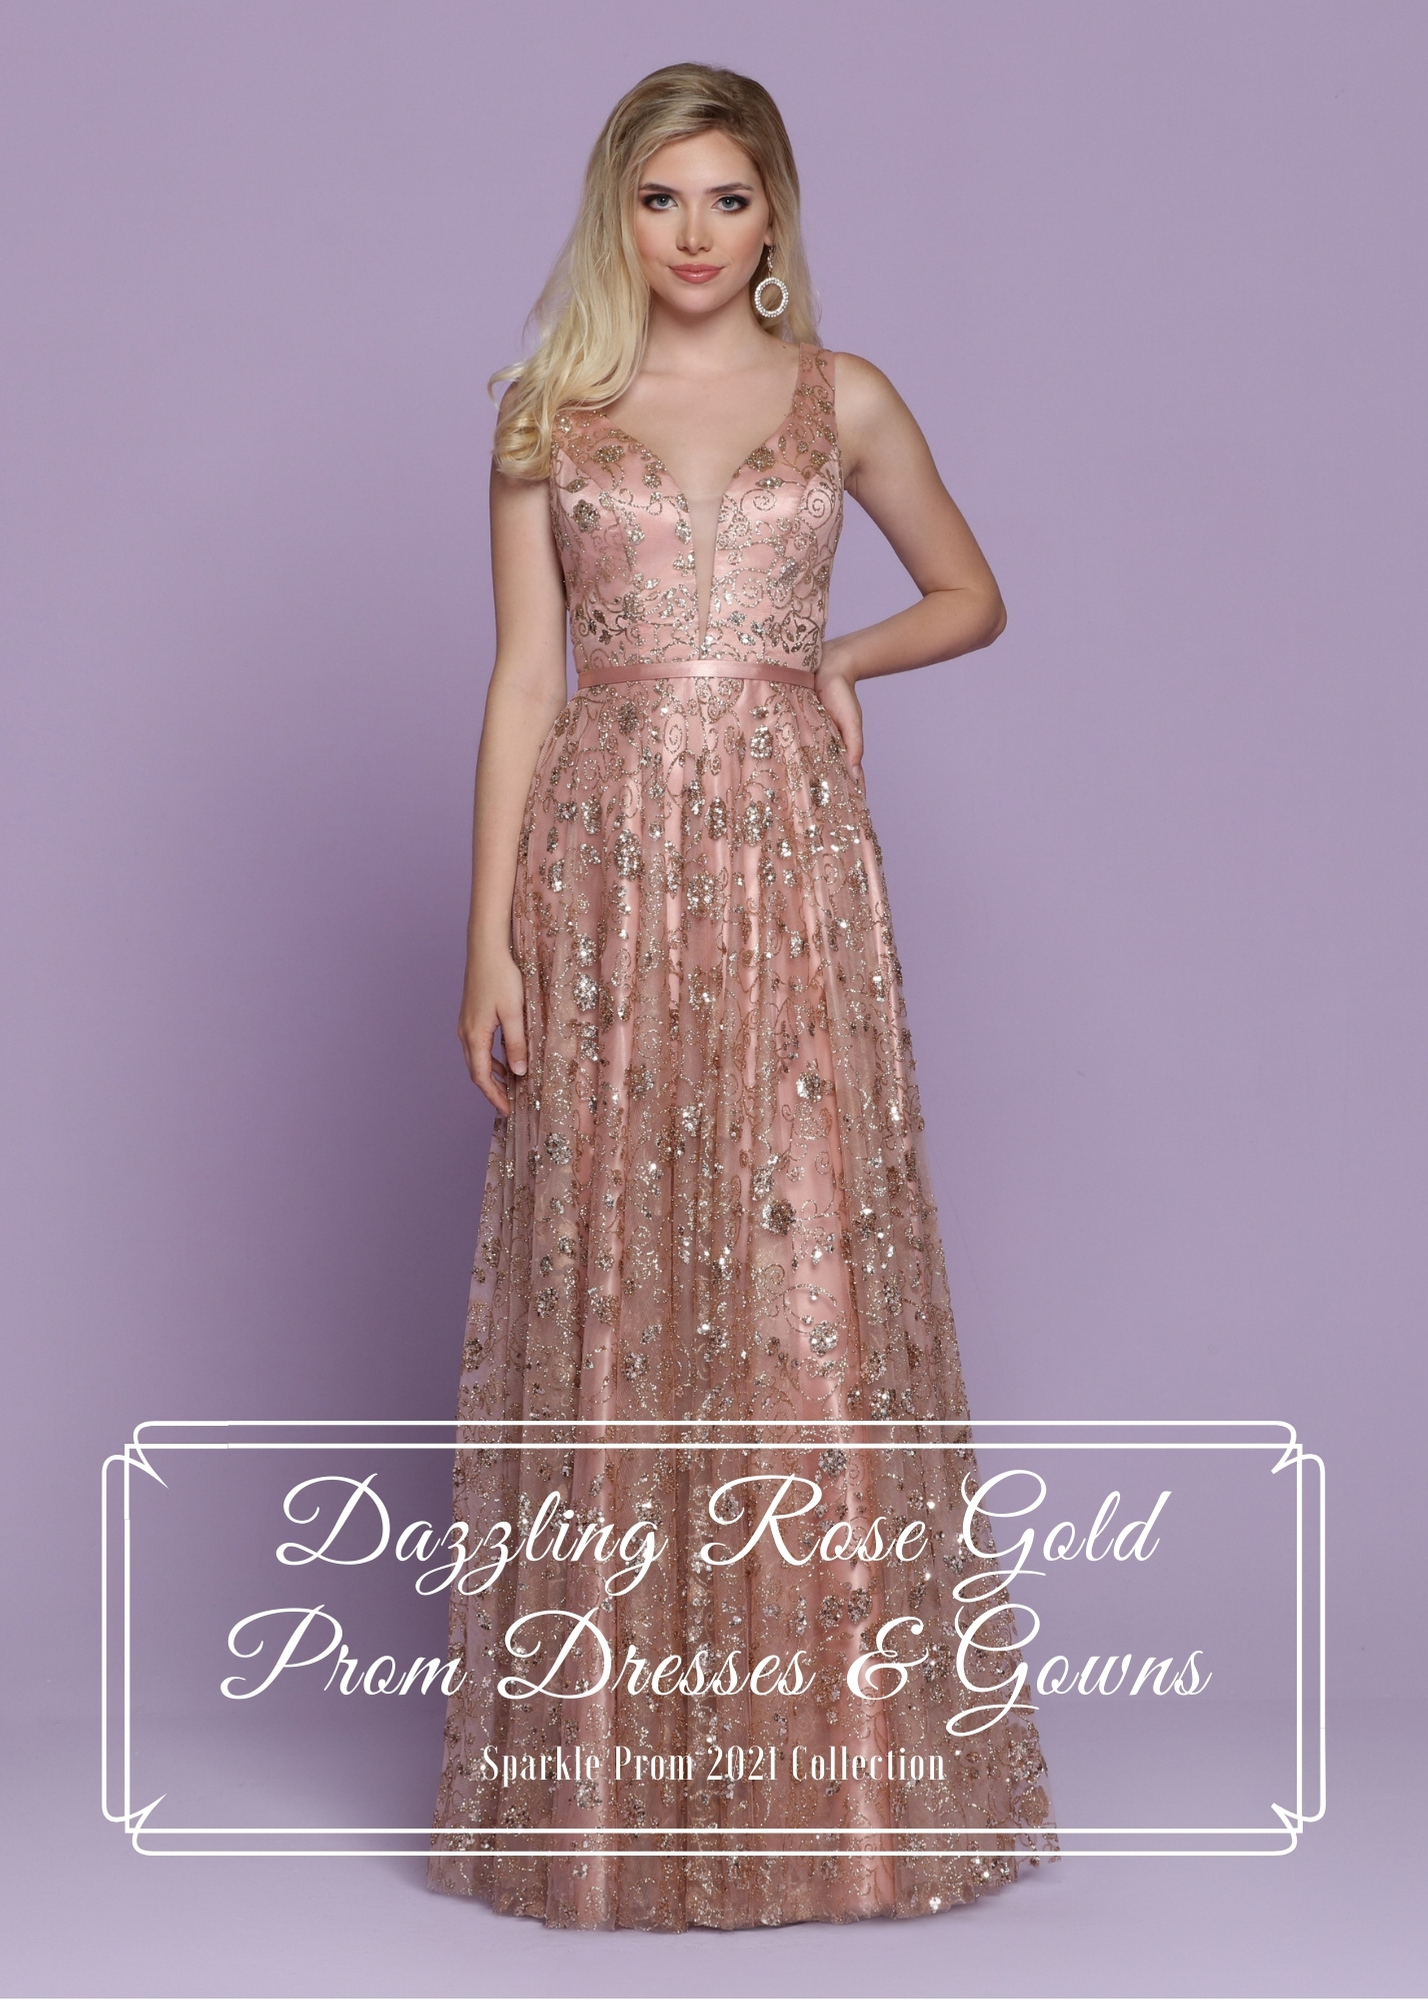 Rose Gold Prom & Homecoming Dresses for 2021 – Sparkle Prom